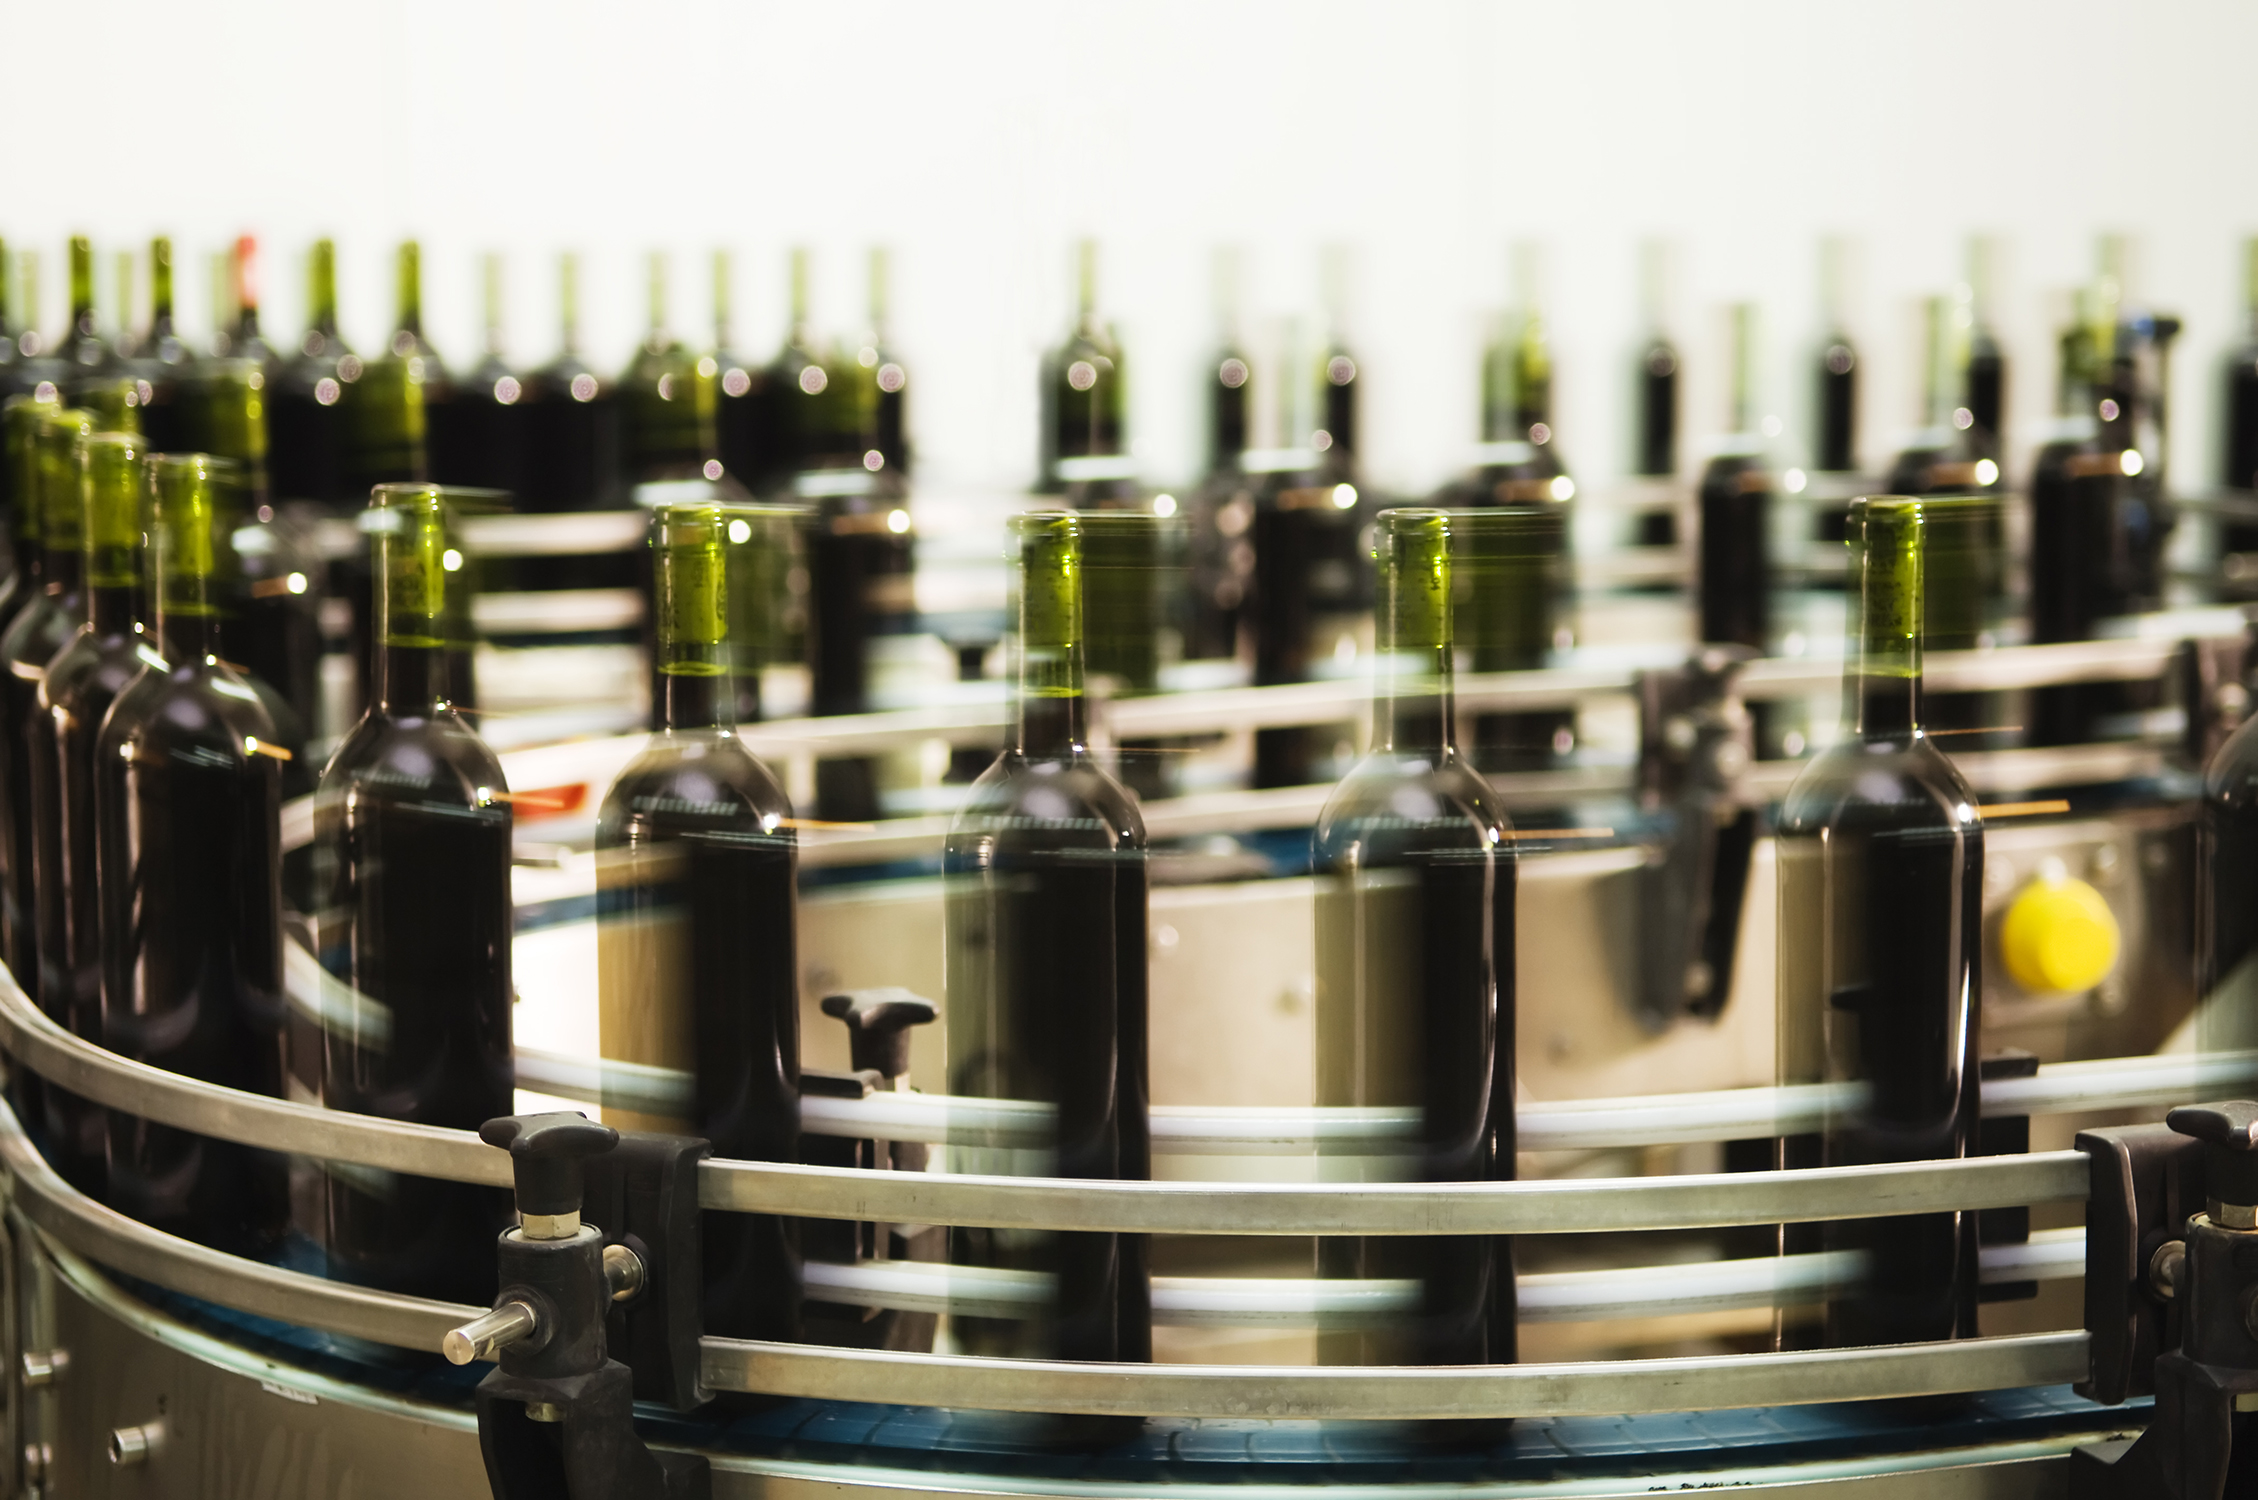 A German wine producer uses a series of conveyors to transport their bottles through the production process. At the end of the system, the bottles are buffered and accumulated on a spiral conveyor. (Image Source: istock-97151143 – mrfotos)